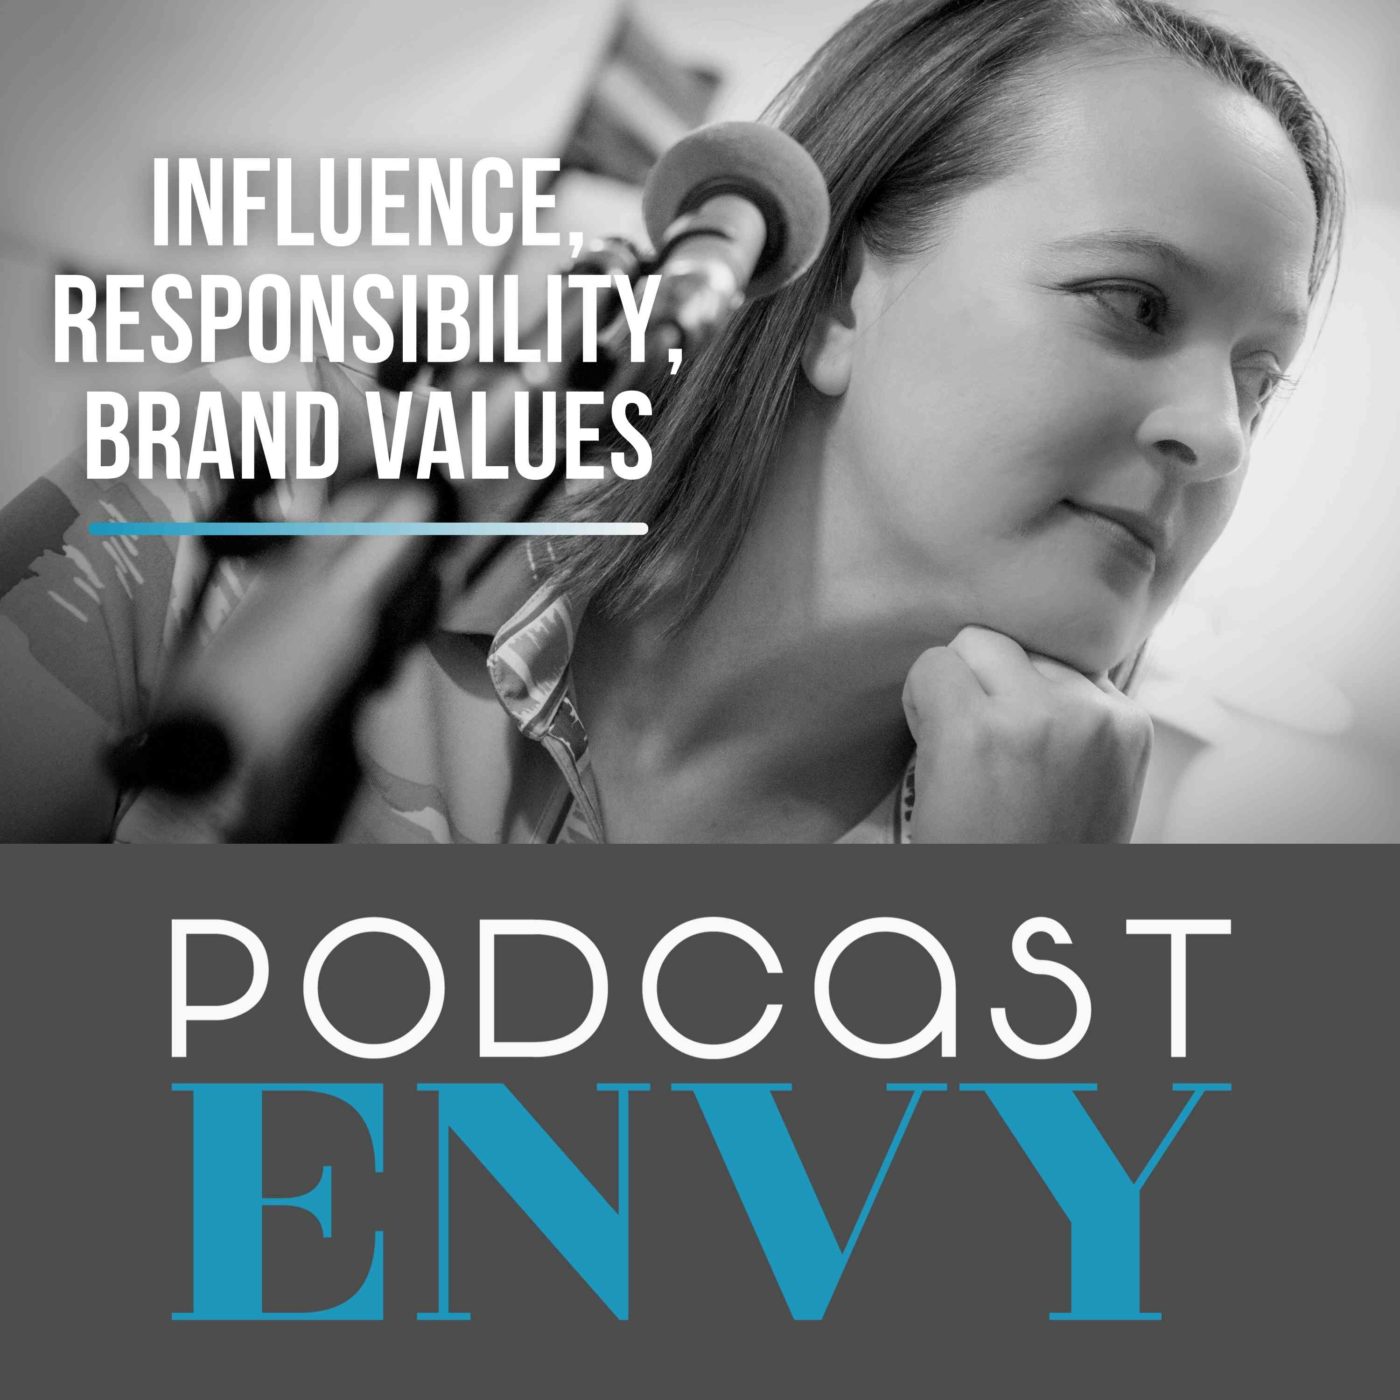 It’s not about Joe: Influence, responsibility, and brand values